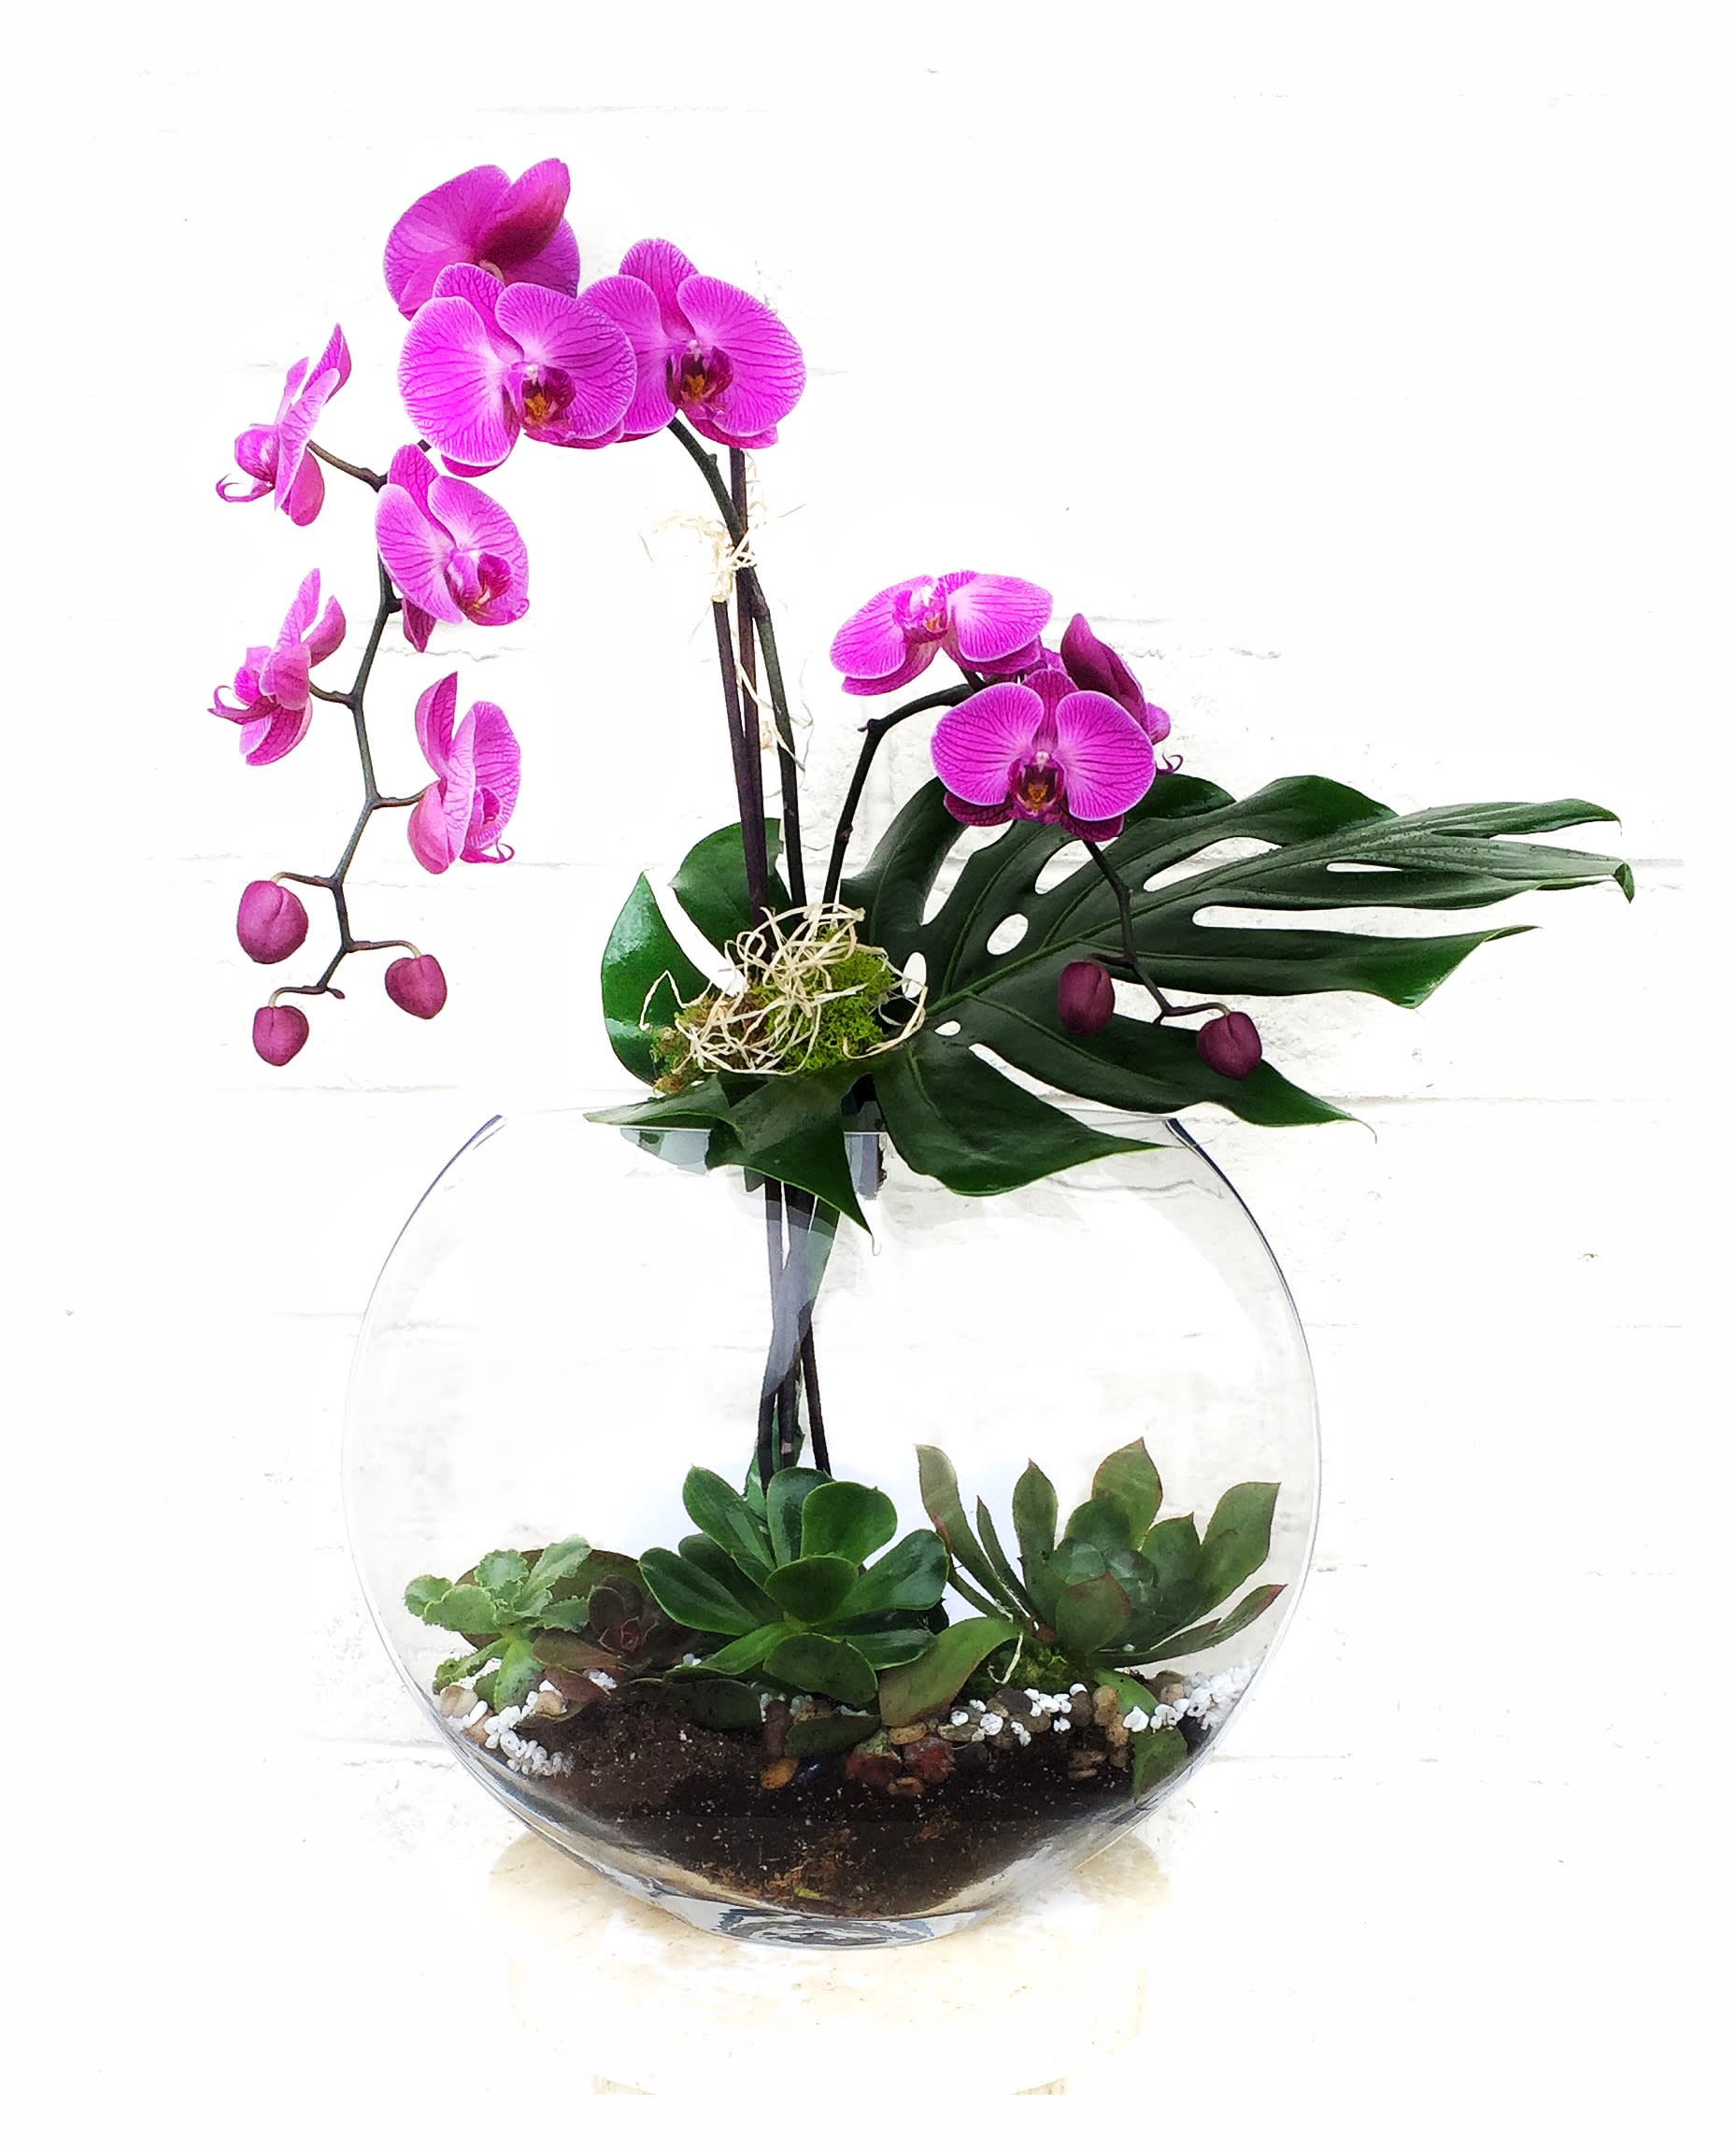 Moonlight - Zen garden design including phalaenopsis orchid and succulent plants in a quality glass vase.